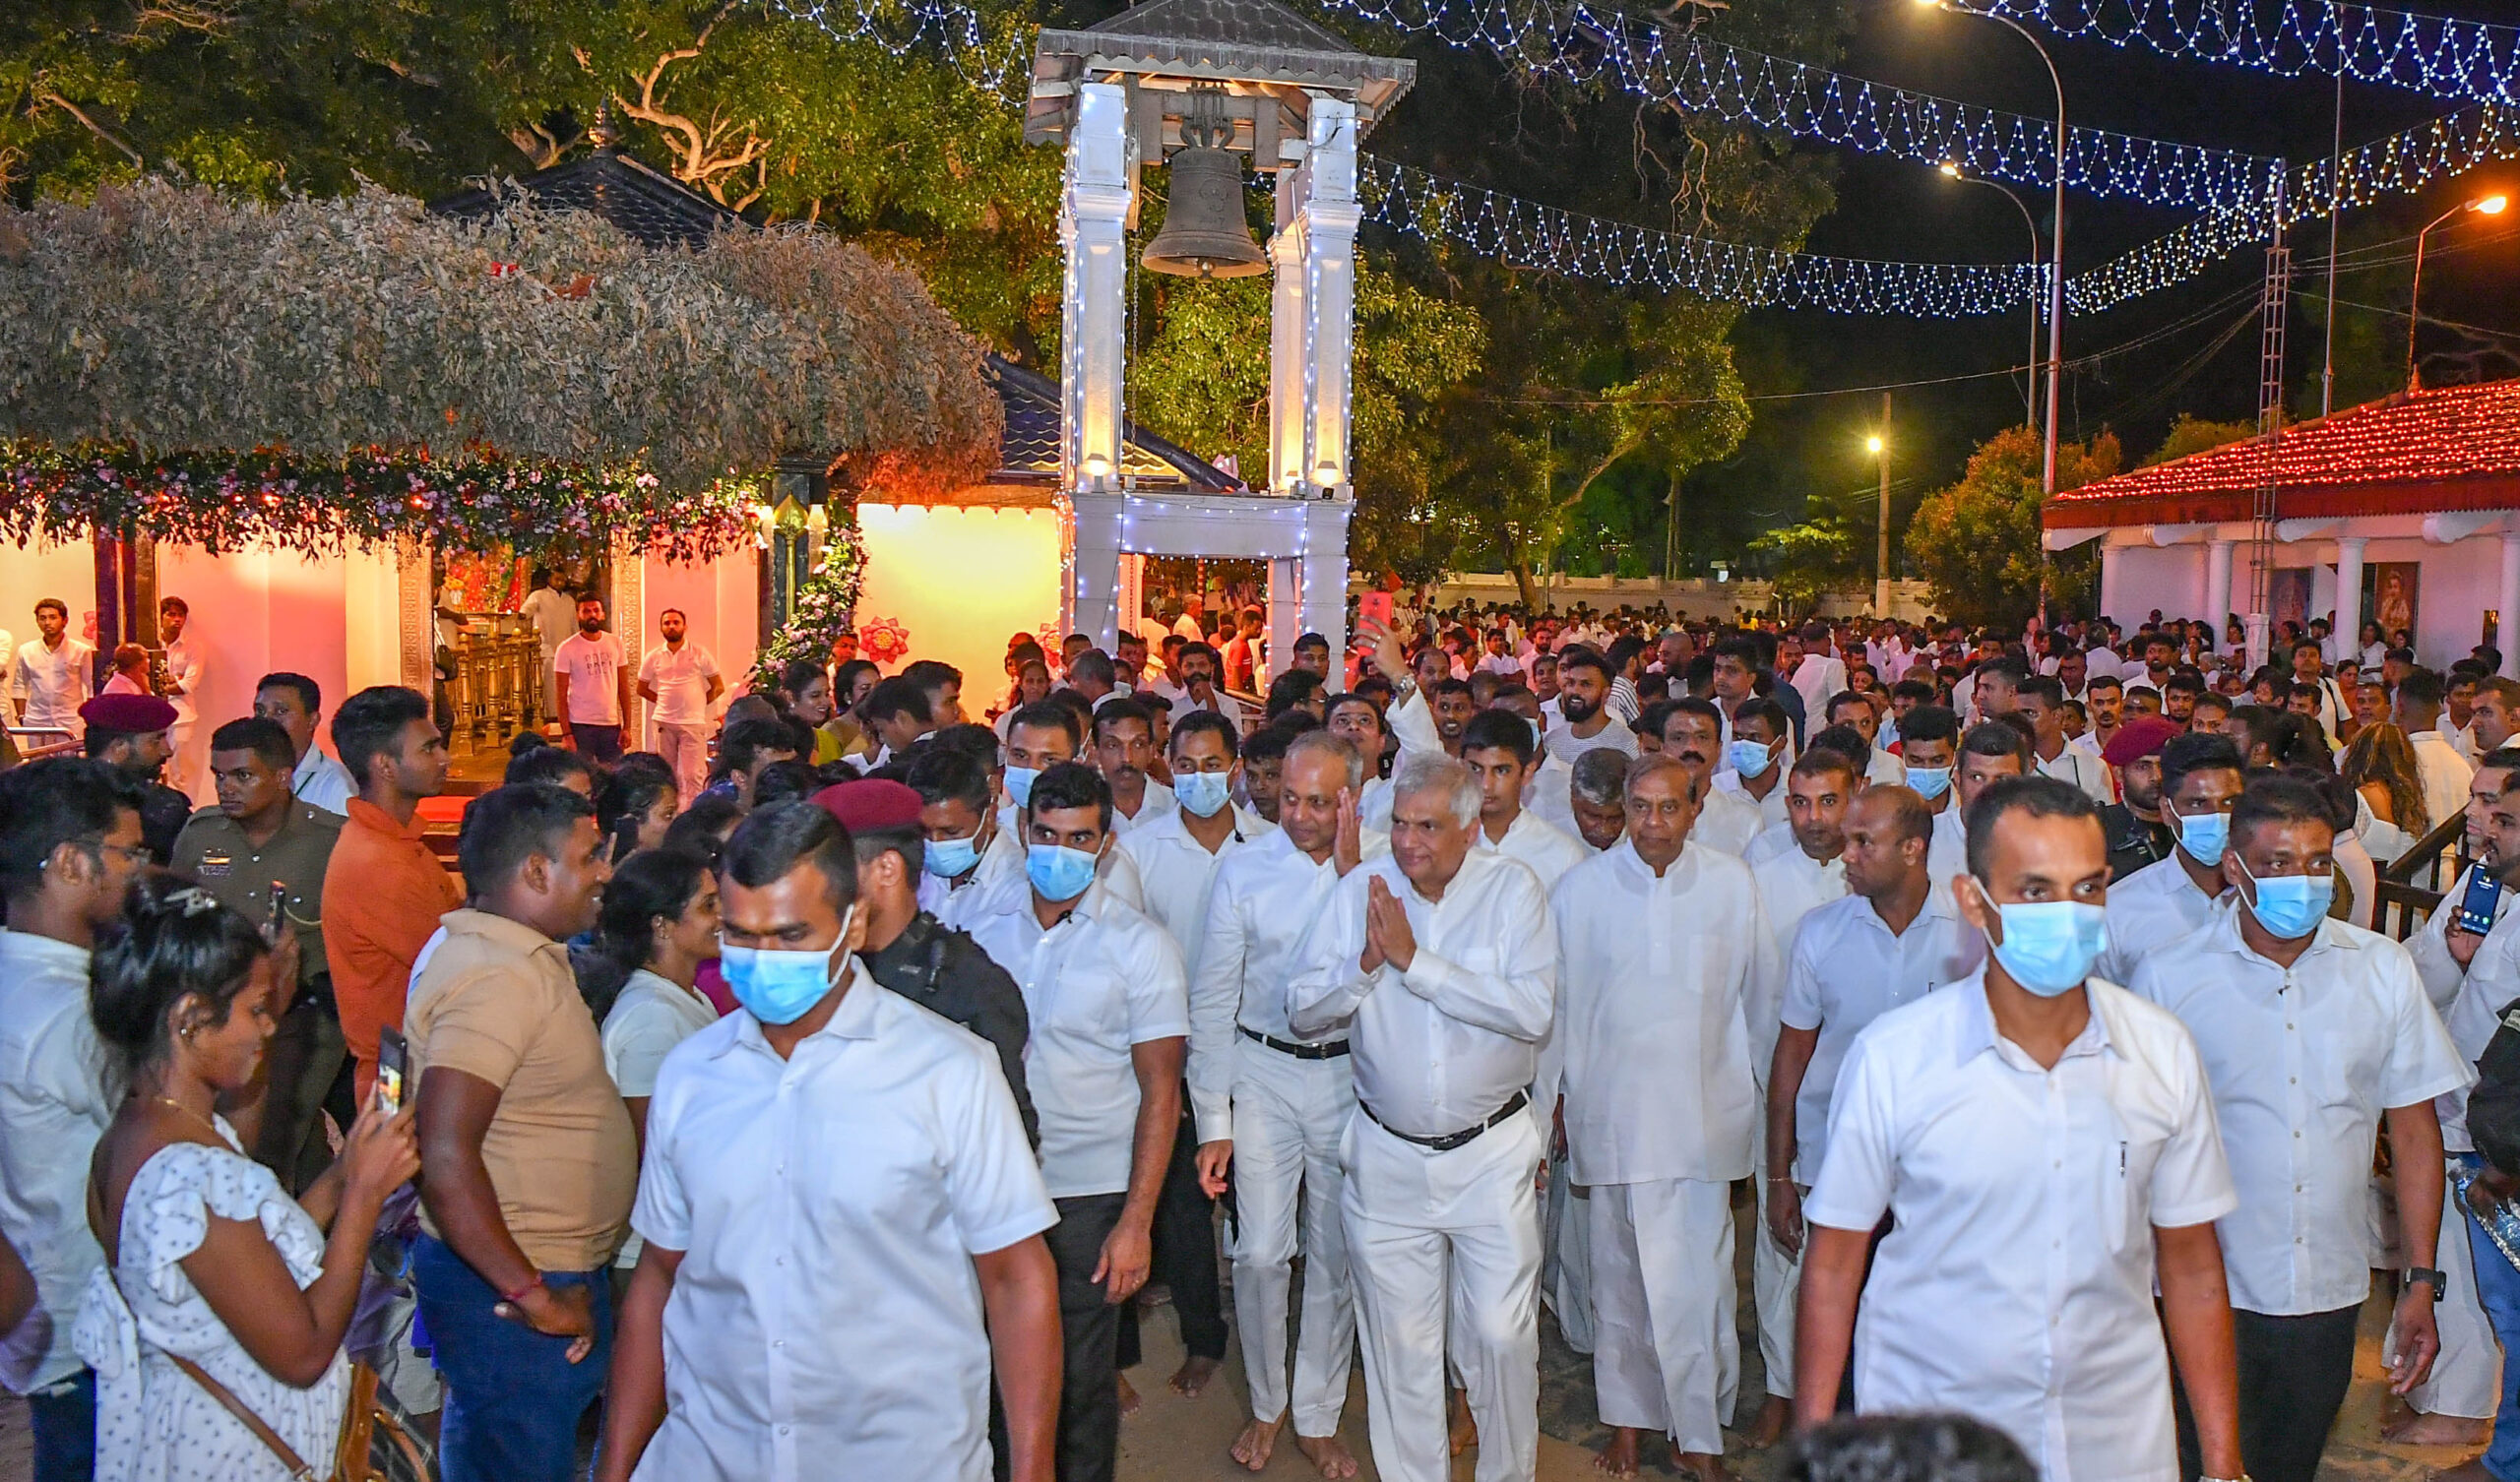 The President engages in religious rituals at the historic Kataragama shrine